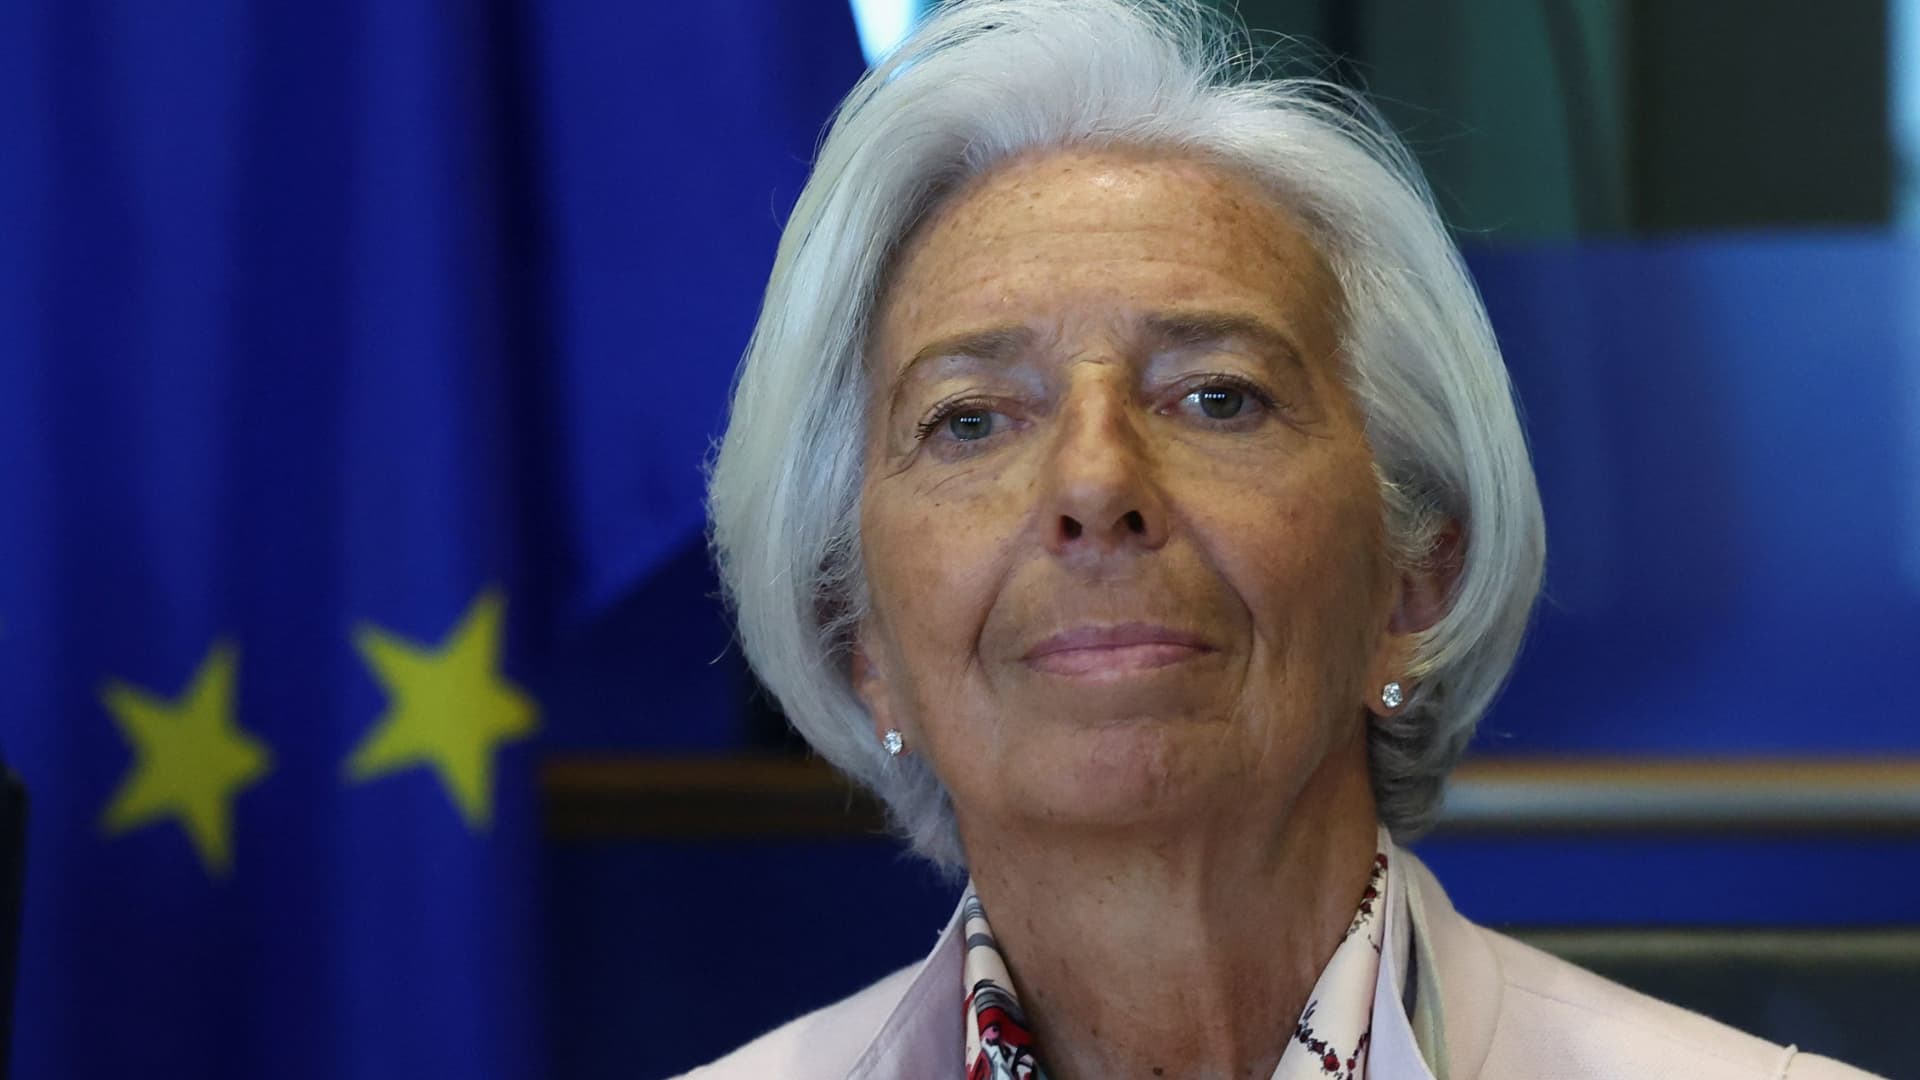 ECB's Lagarde: Increasing signs that the global economy is fragmenting into competing blocs